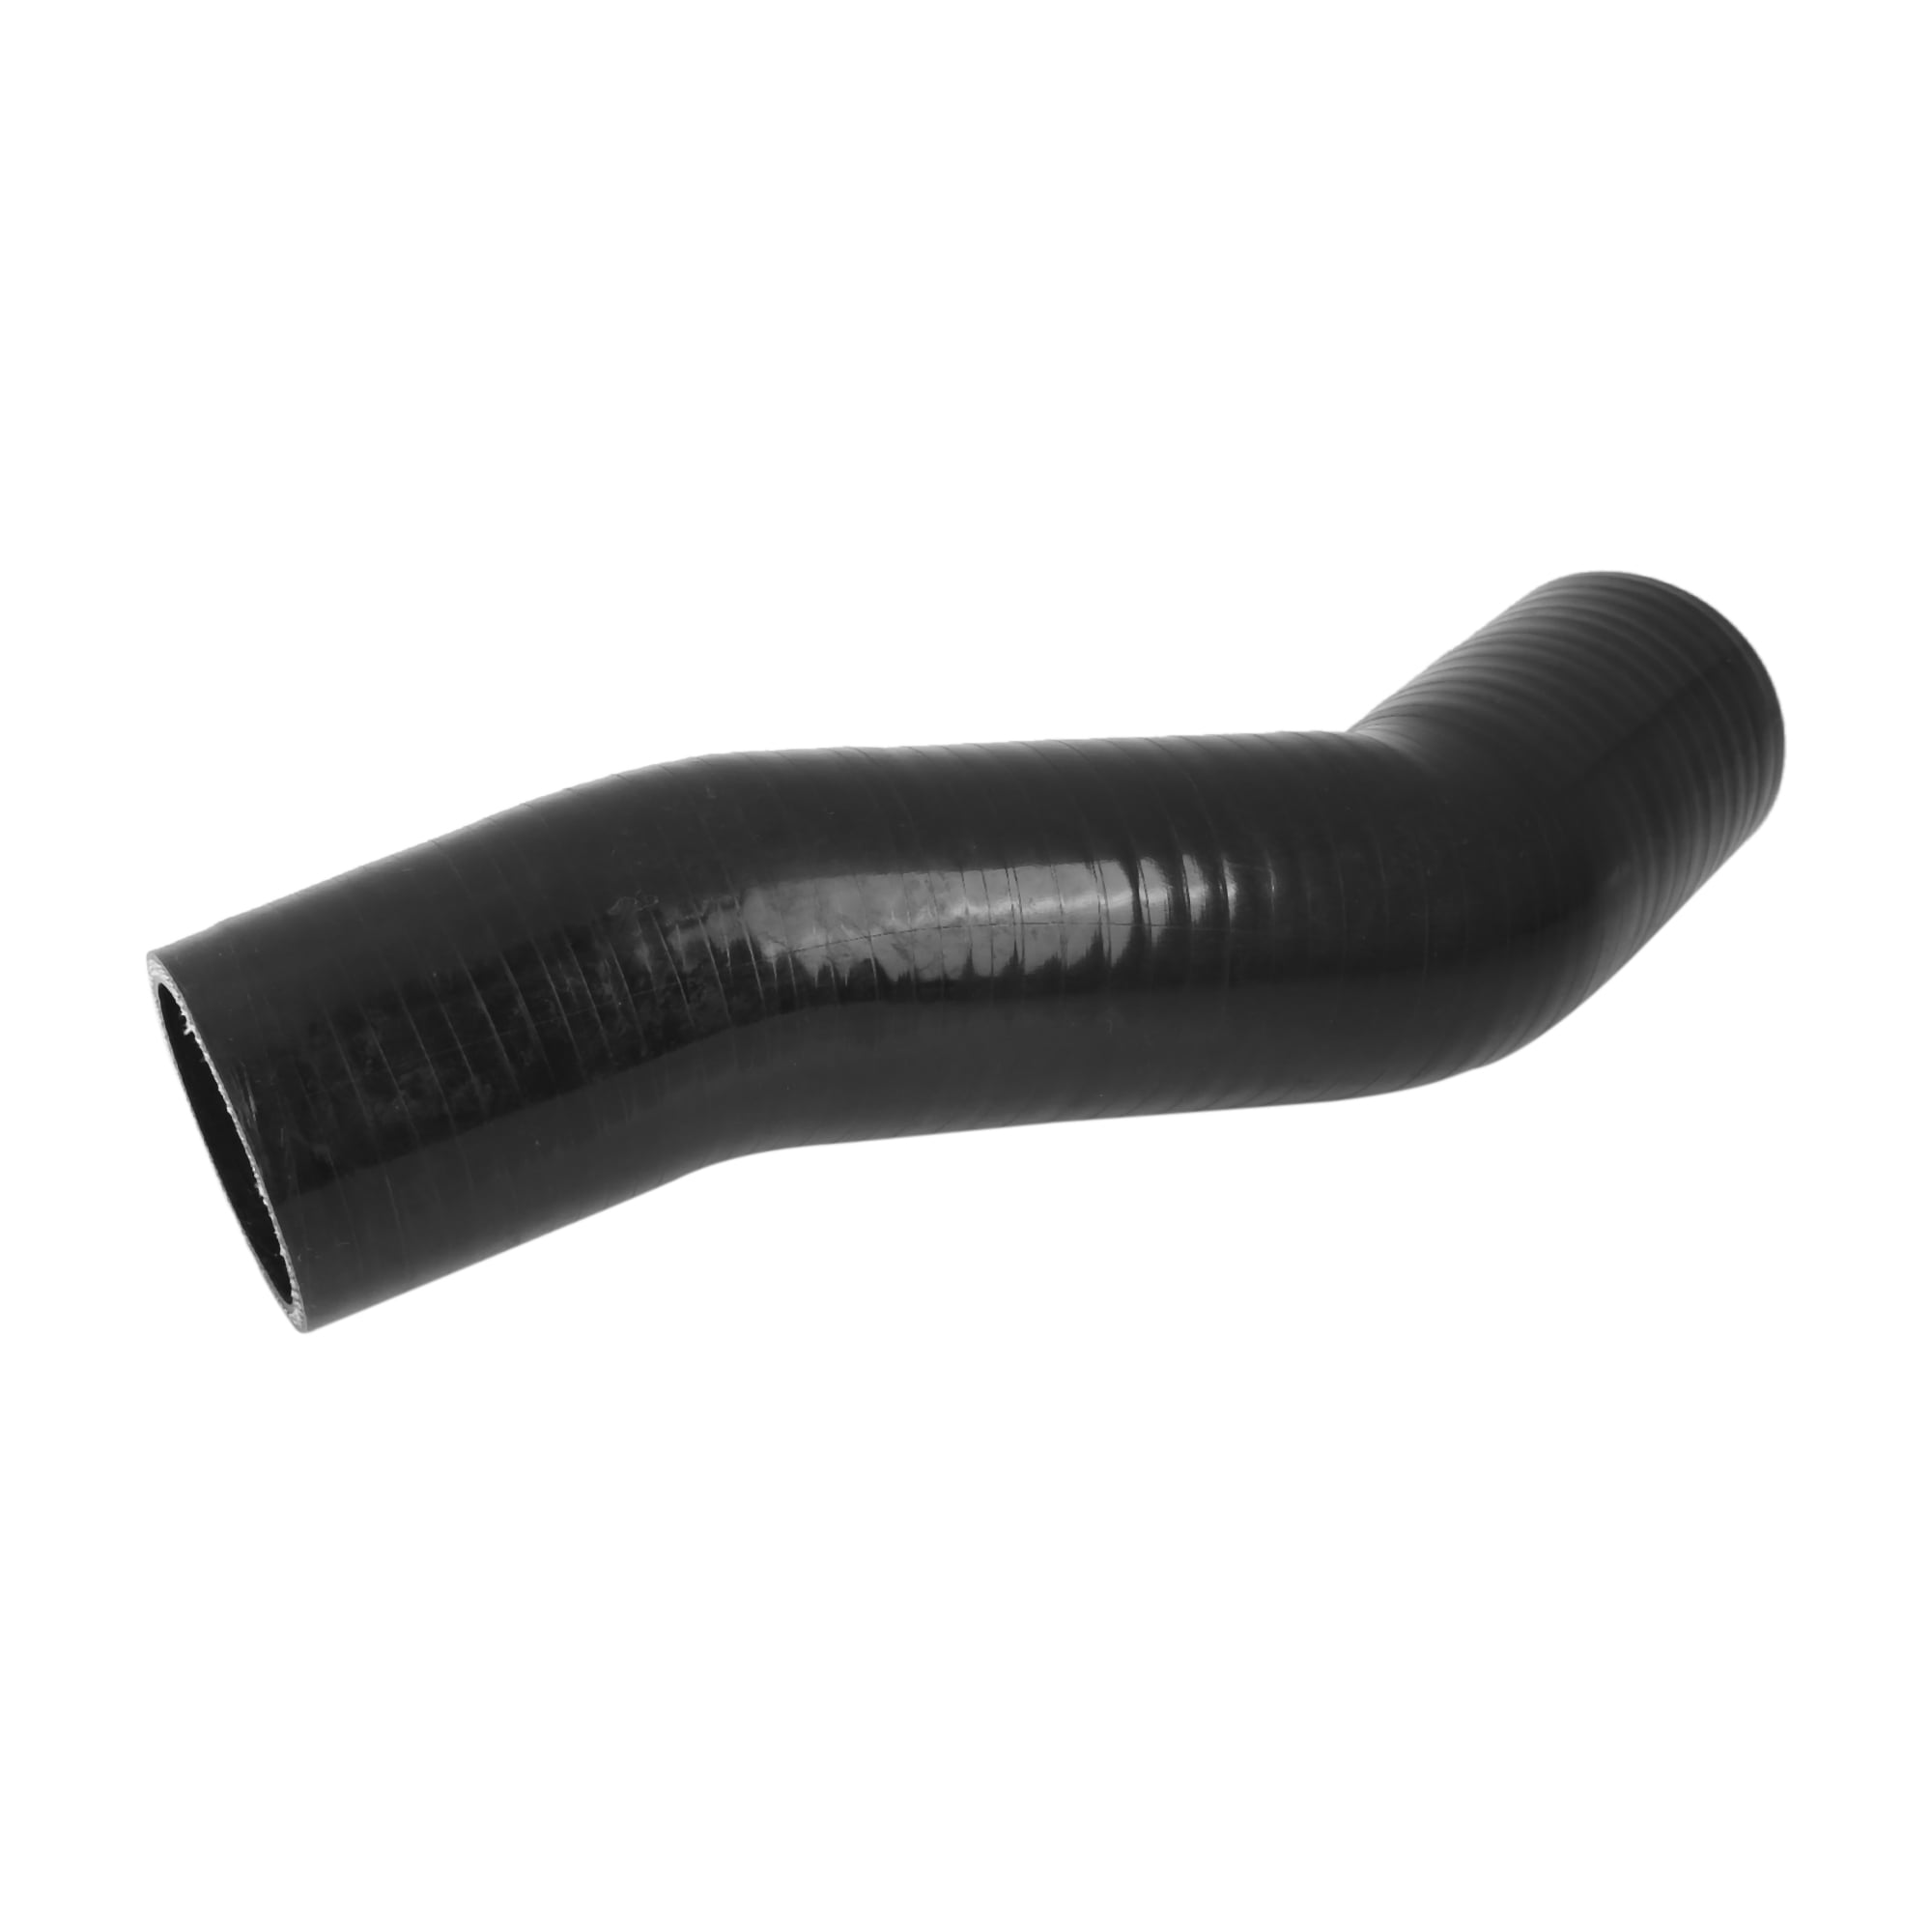 C2S26986 INTERCOOLER TURBO BOOST SILICONE HOSE PIPE FOR X TYPE 2.0 2.2 TDCI 